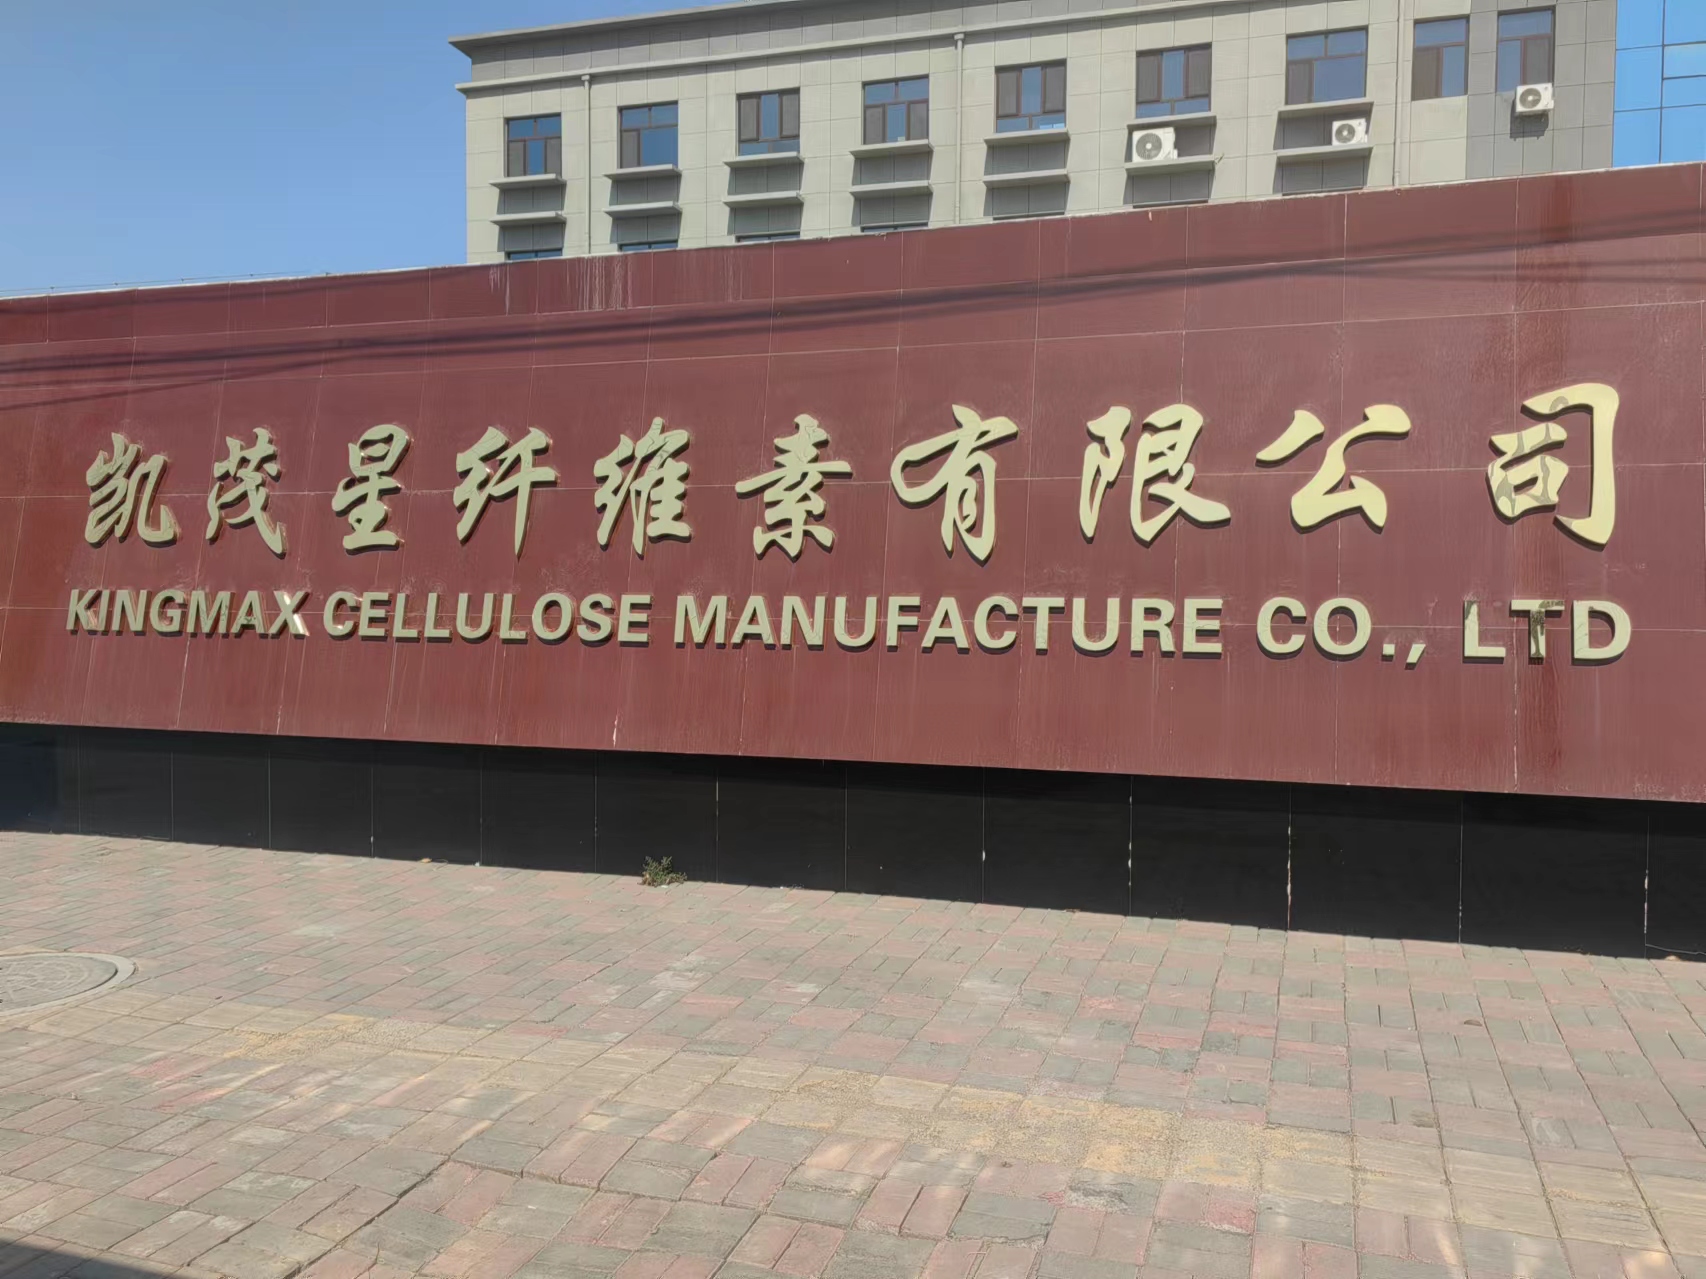 Our company’s English abbreviation in the international market is “KINGMAX CELLULOSE”